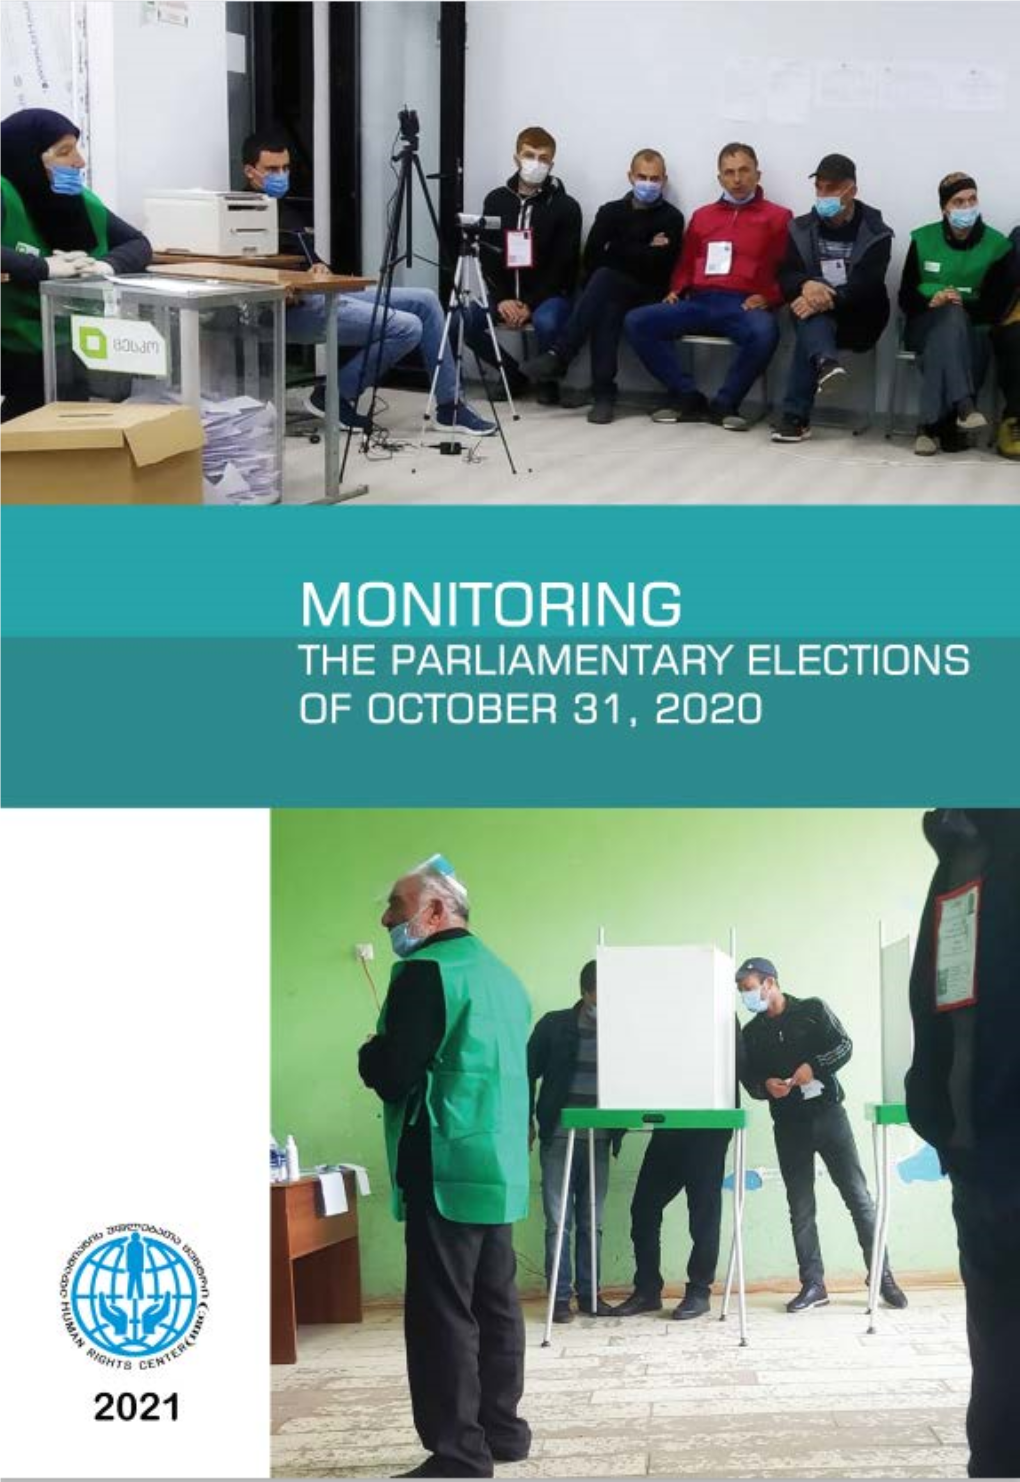 Monitoring the Parliamentary Elections of October 31, 2020